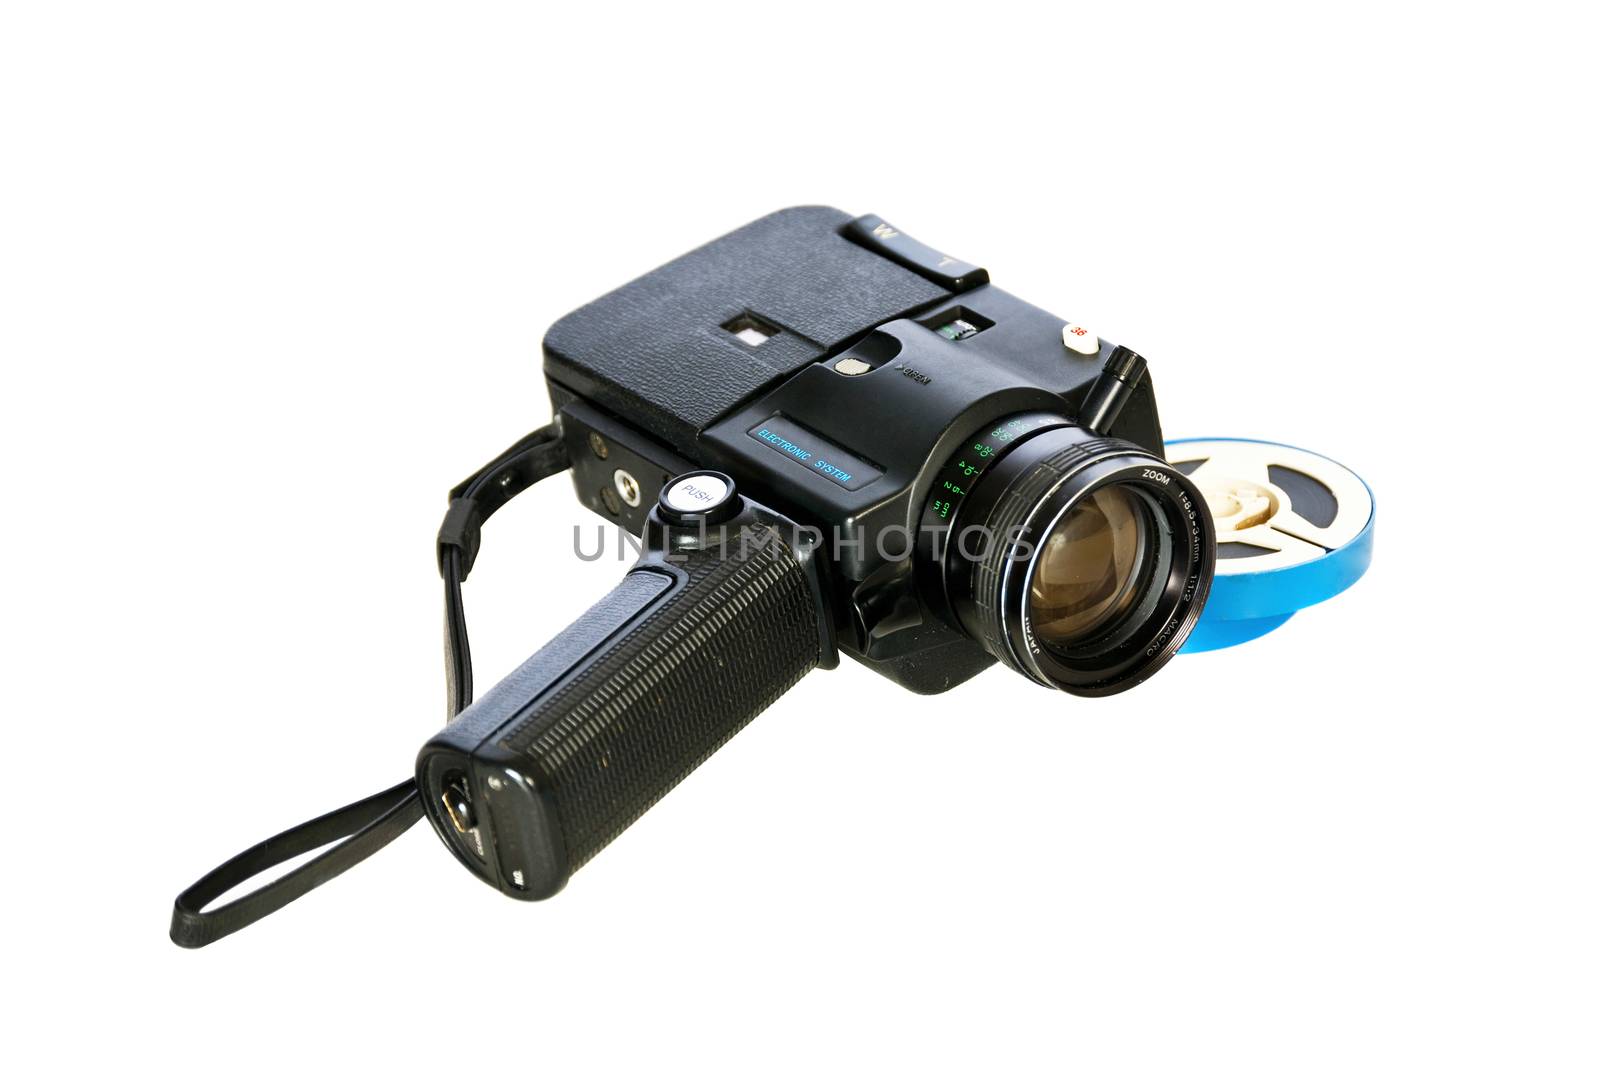 Super 8 movie camera and developed film. Isolated on a white background.